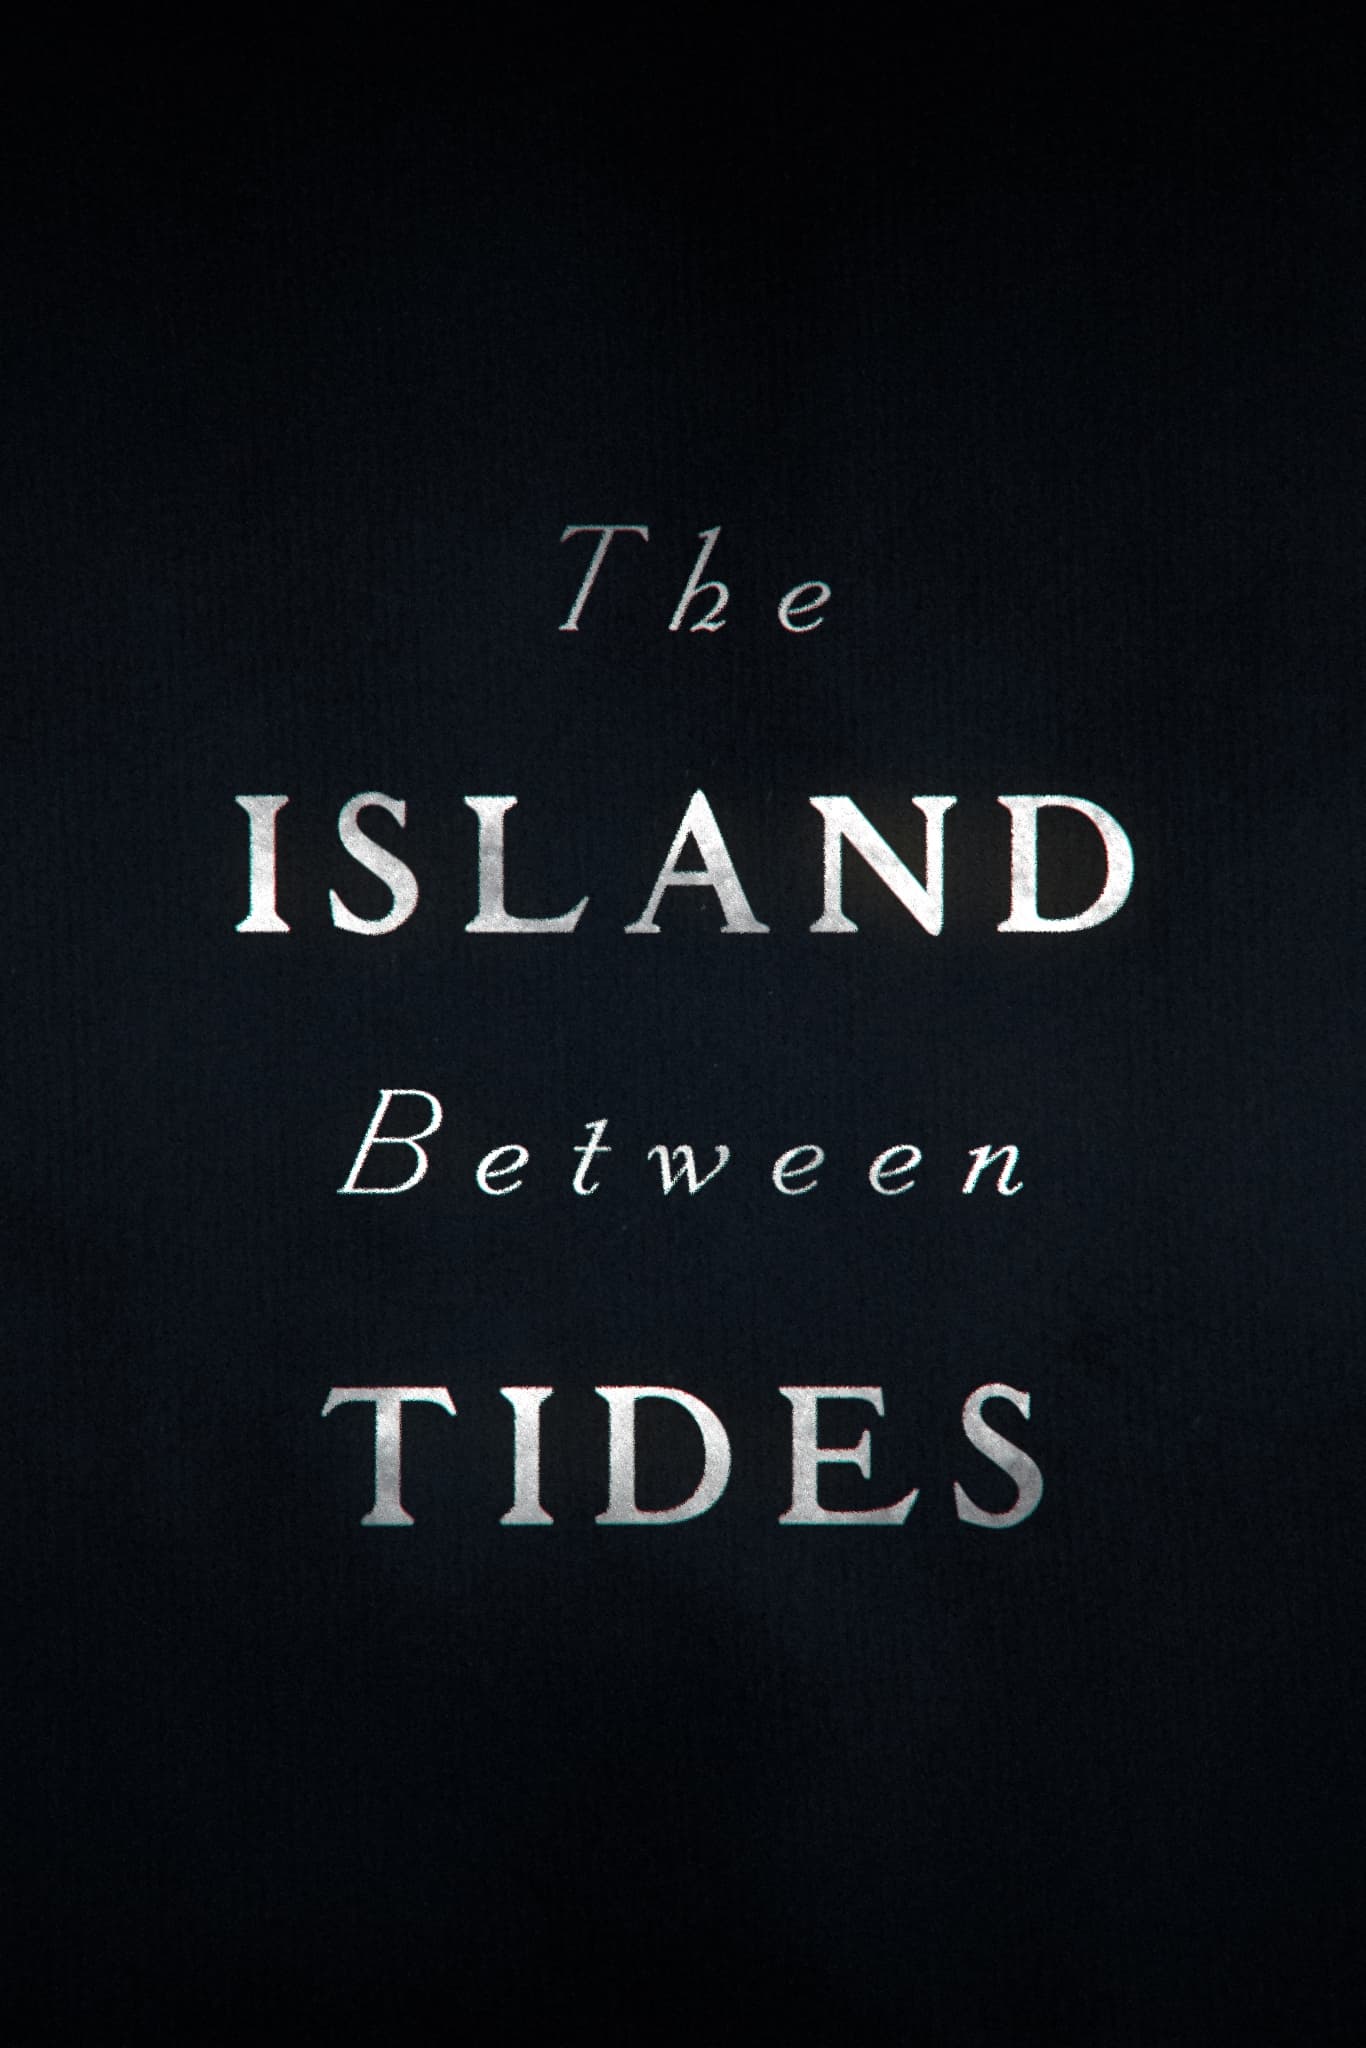 The Island Between Tides film